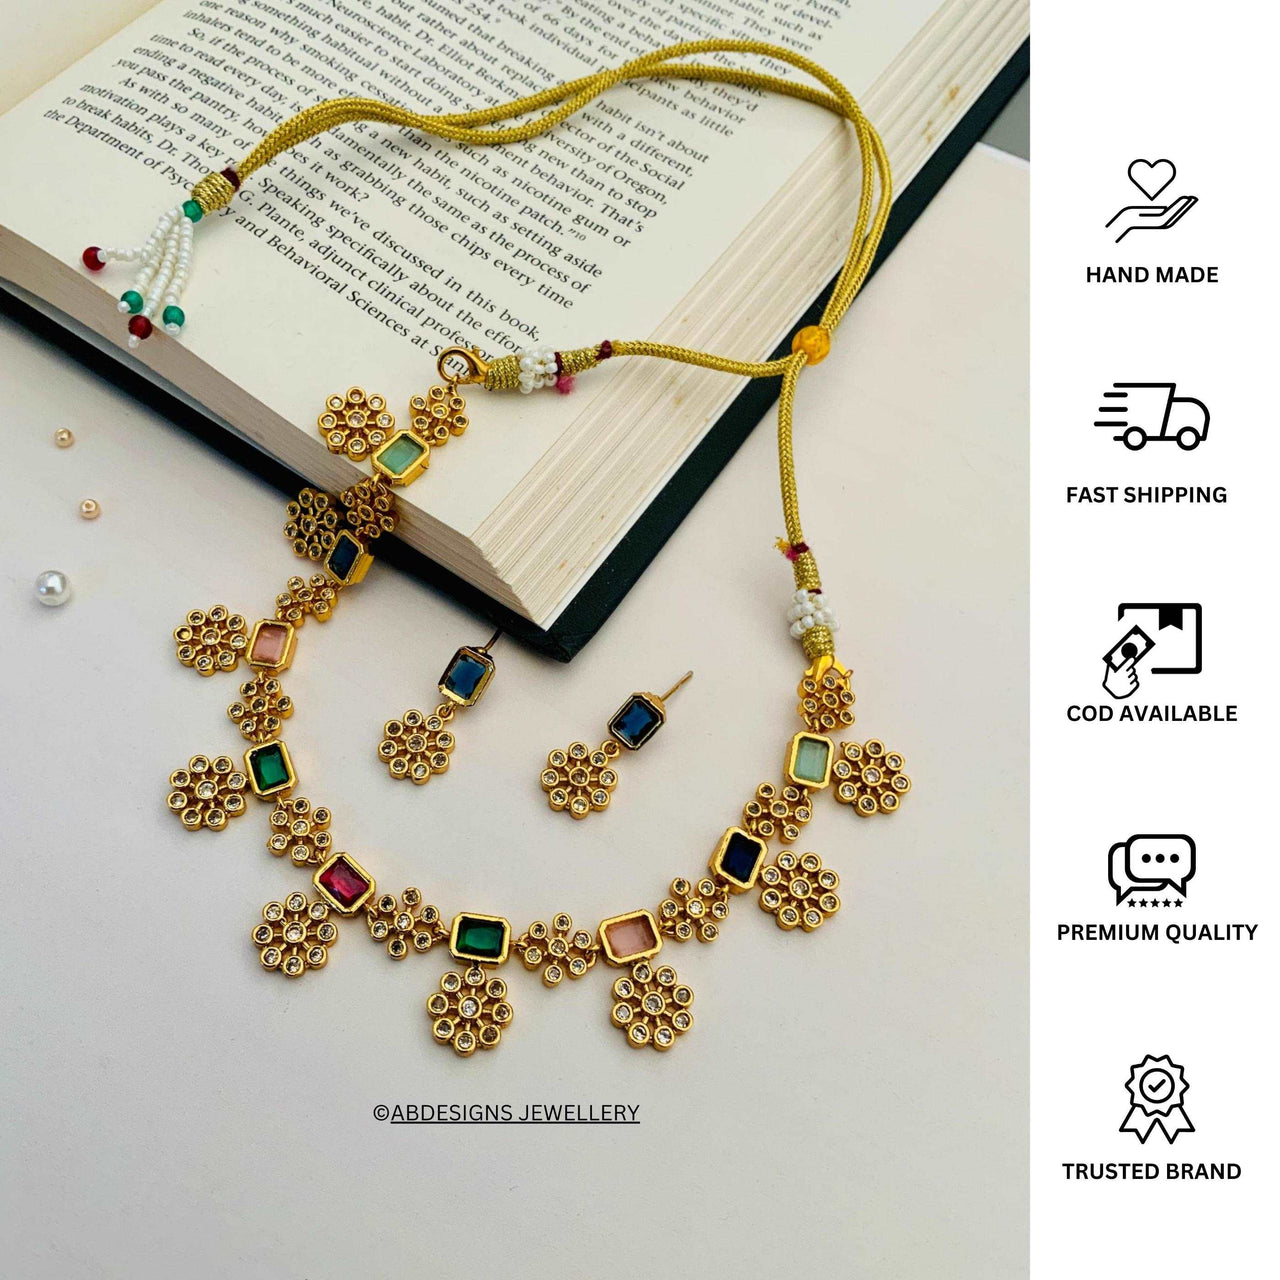 Aesthetic Gold Plated Kempstone Necklace With Pair Of Earrings - Abdesignsjewellery